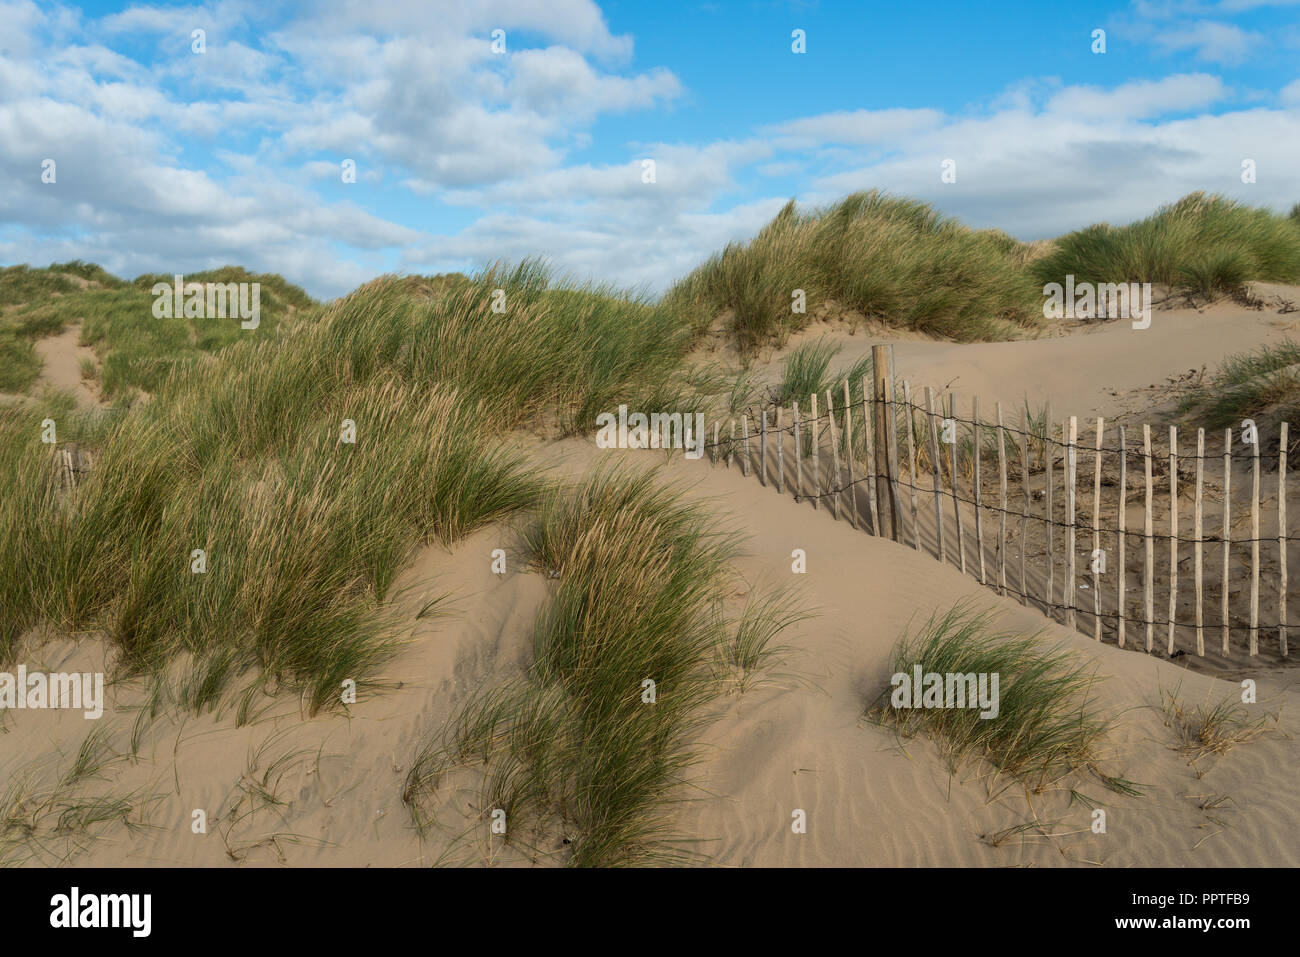 The sandy beach at Formby with sand dunes and a wooden fence on a sunny September afternoon in autumn, Merseyside, England, UK. Stock Photo